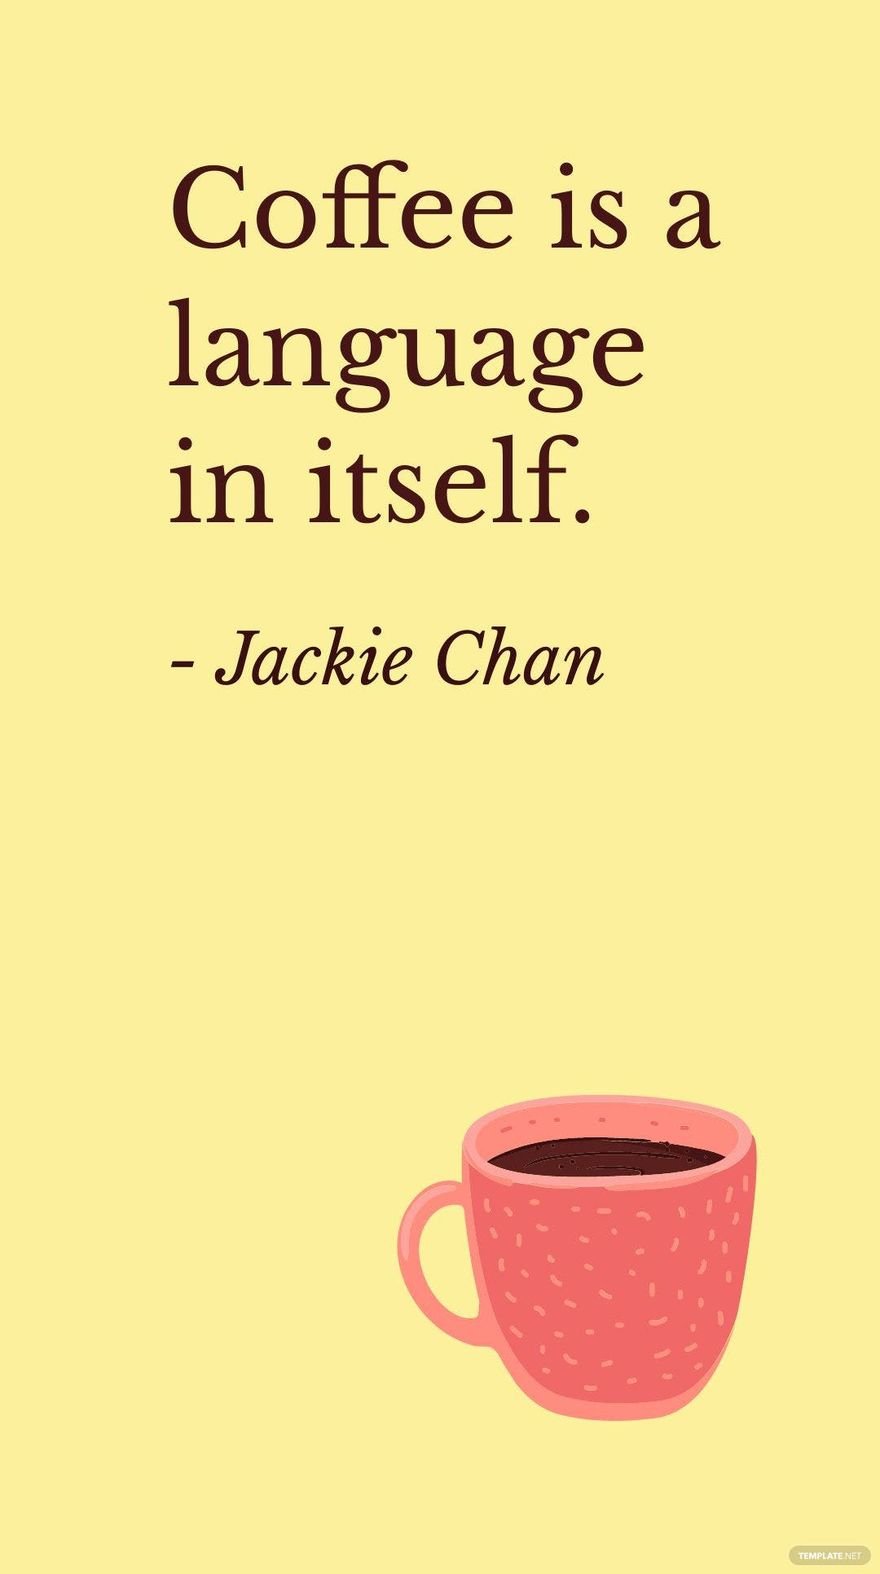 Free Jackie Chan - Coffee is a language in itself.